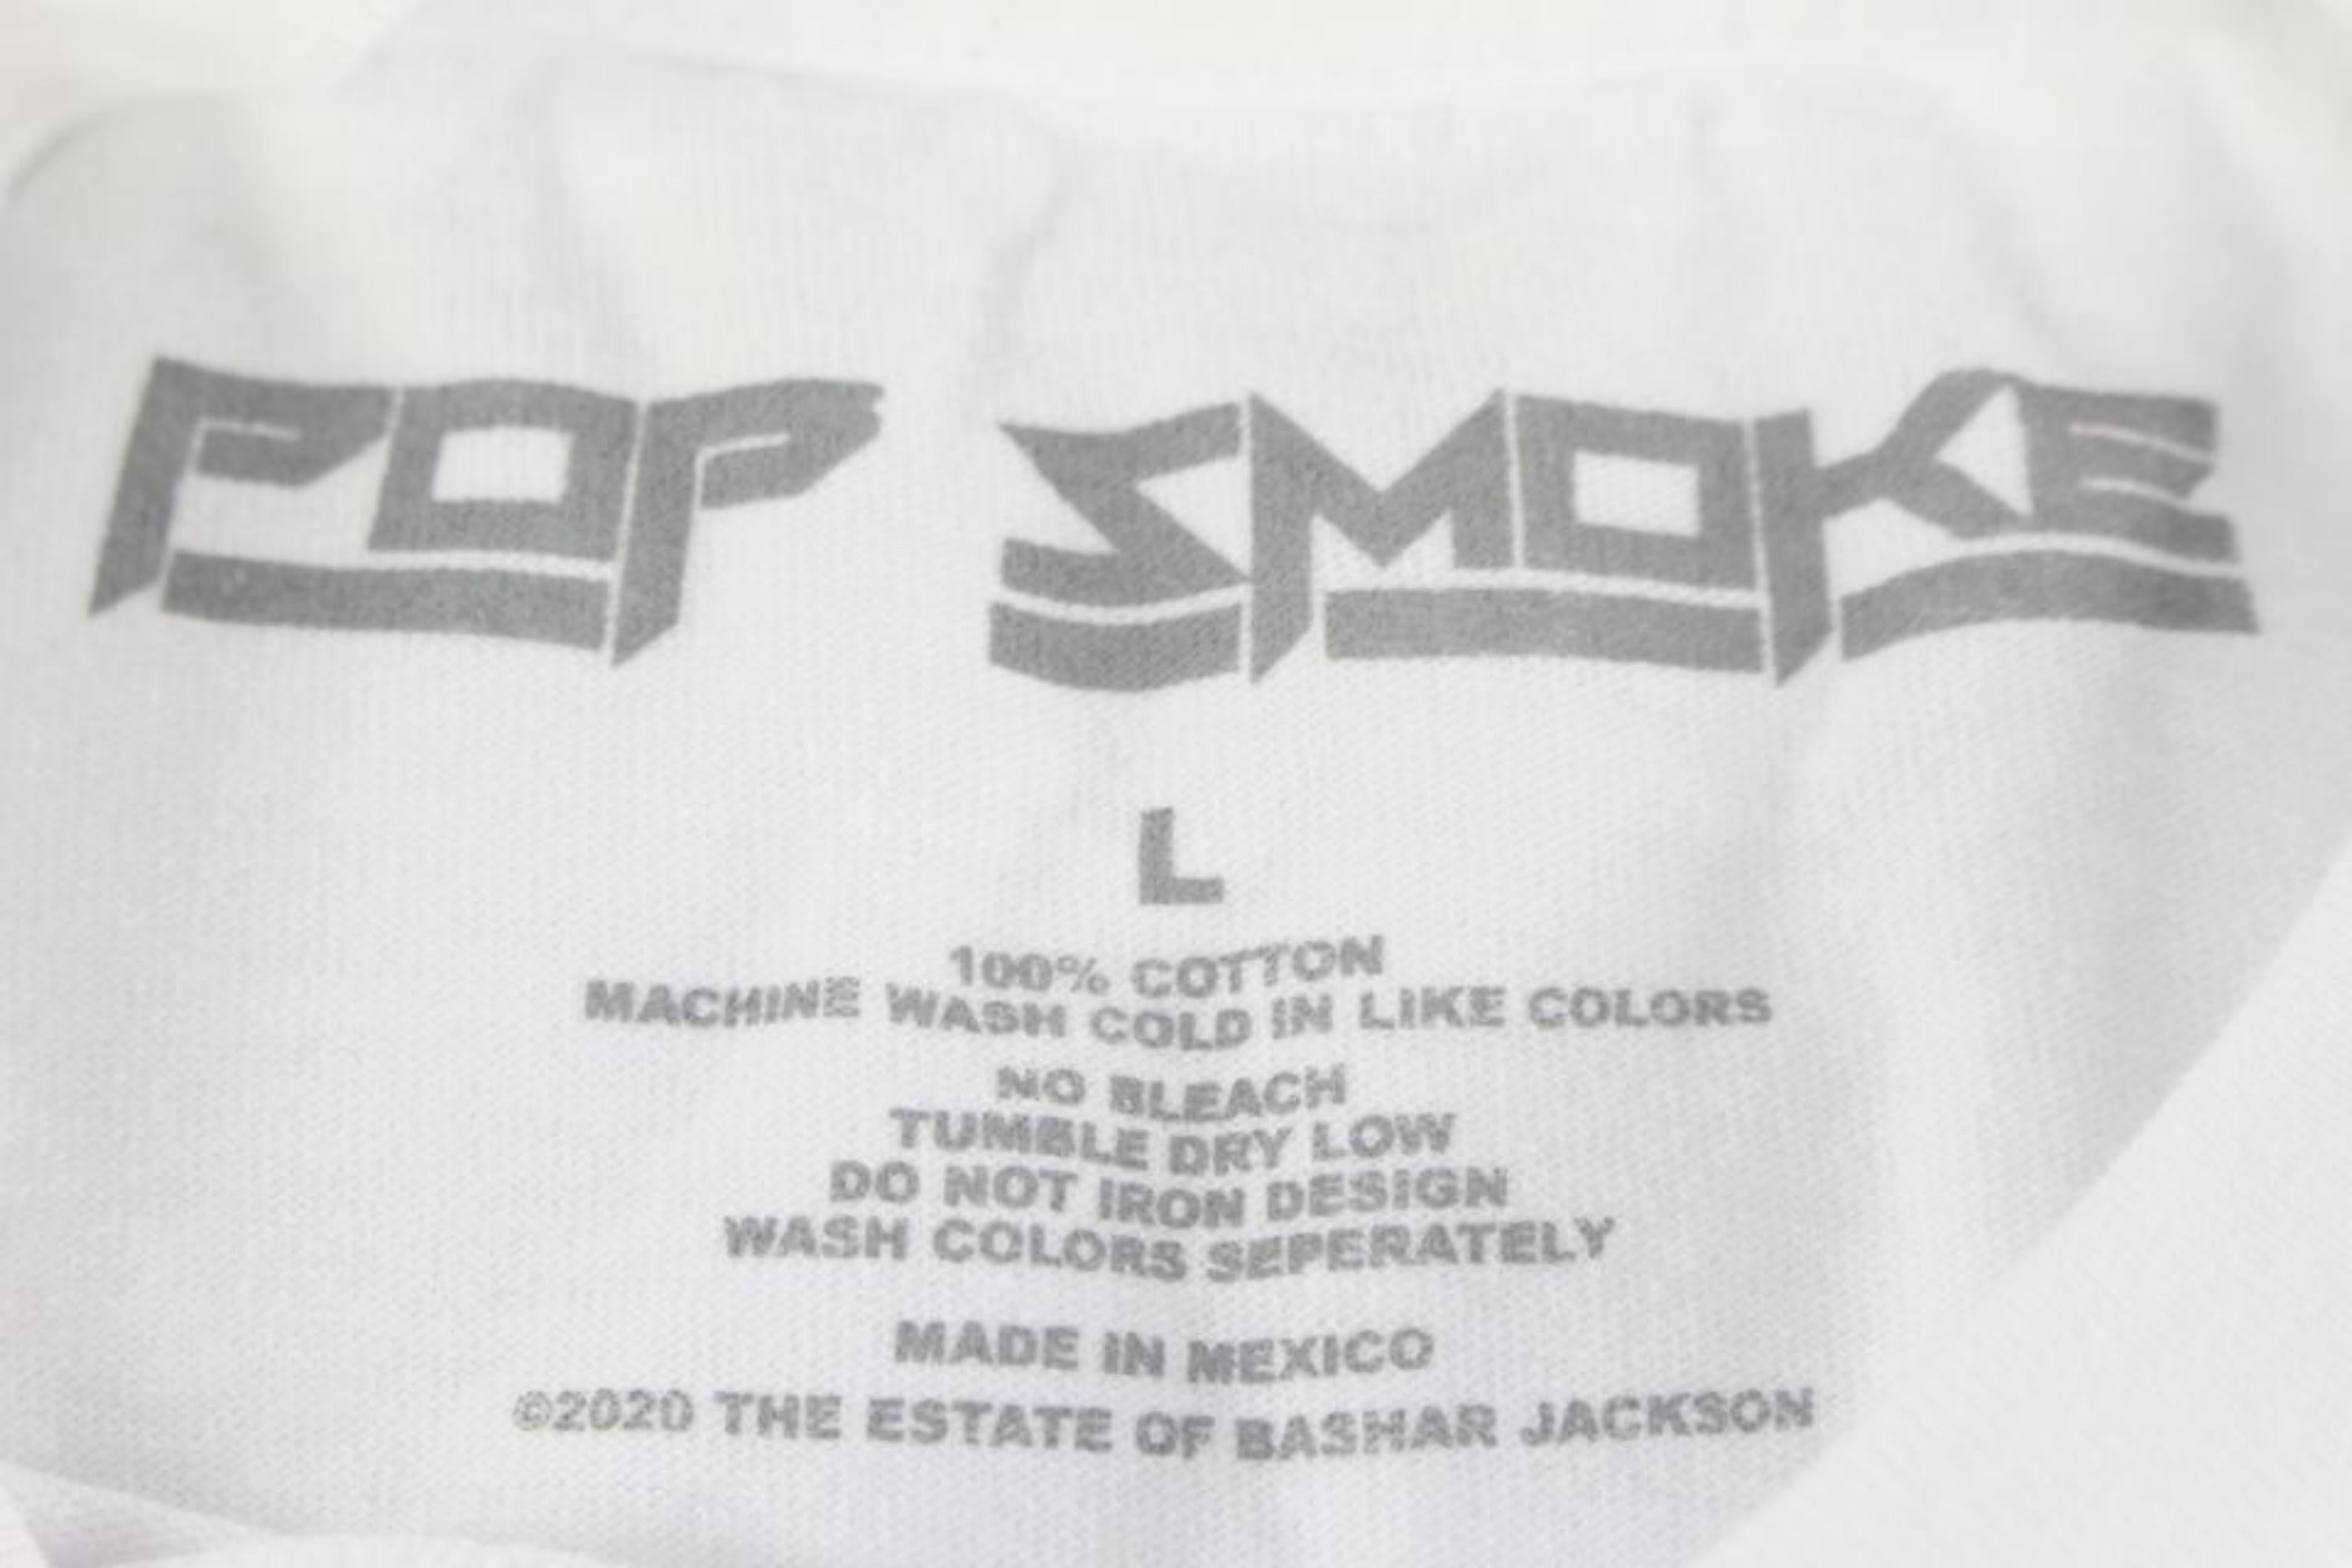 Estate of Bashar Jackson Pop Smoke Virgil Abloh Men's Large Stop the Violence Tee Shirt 123ps38
Made In: Mexico
Measurements: Length:  22.5